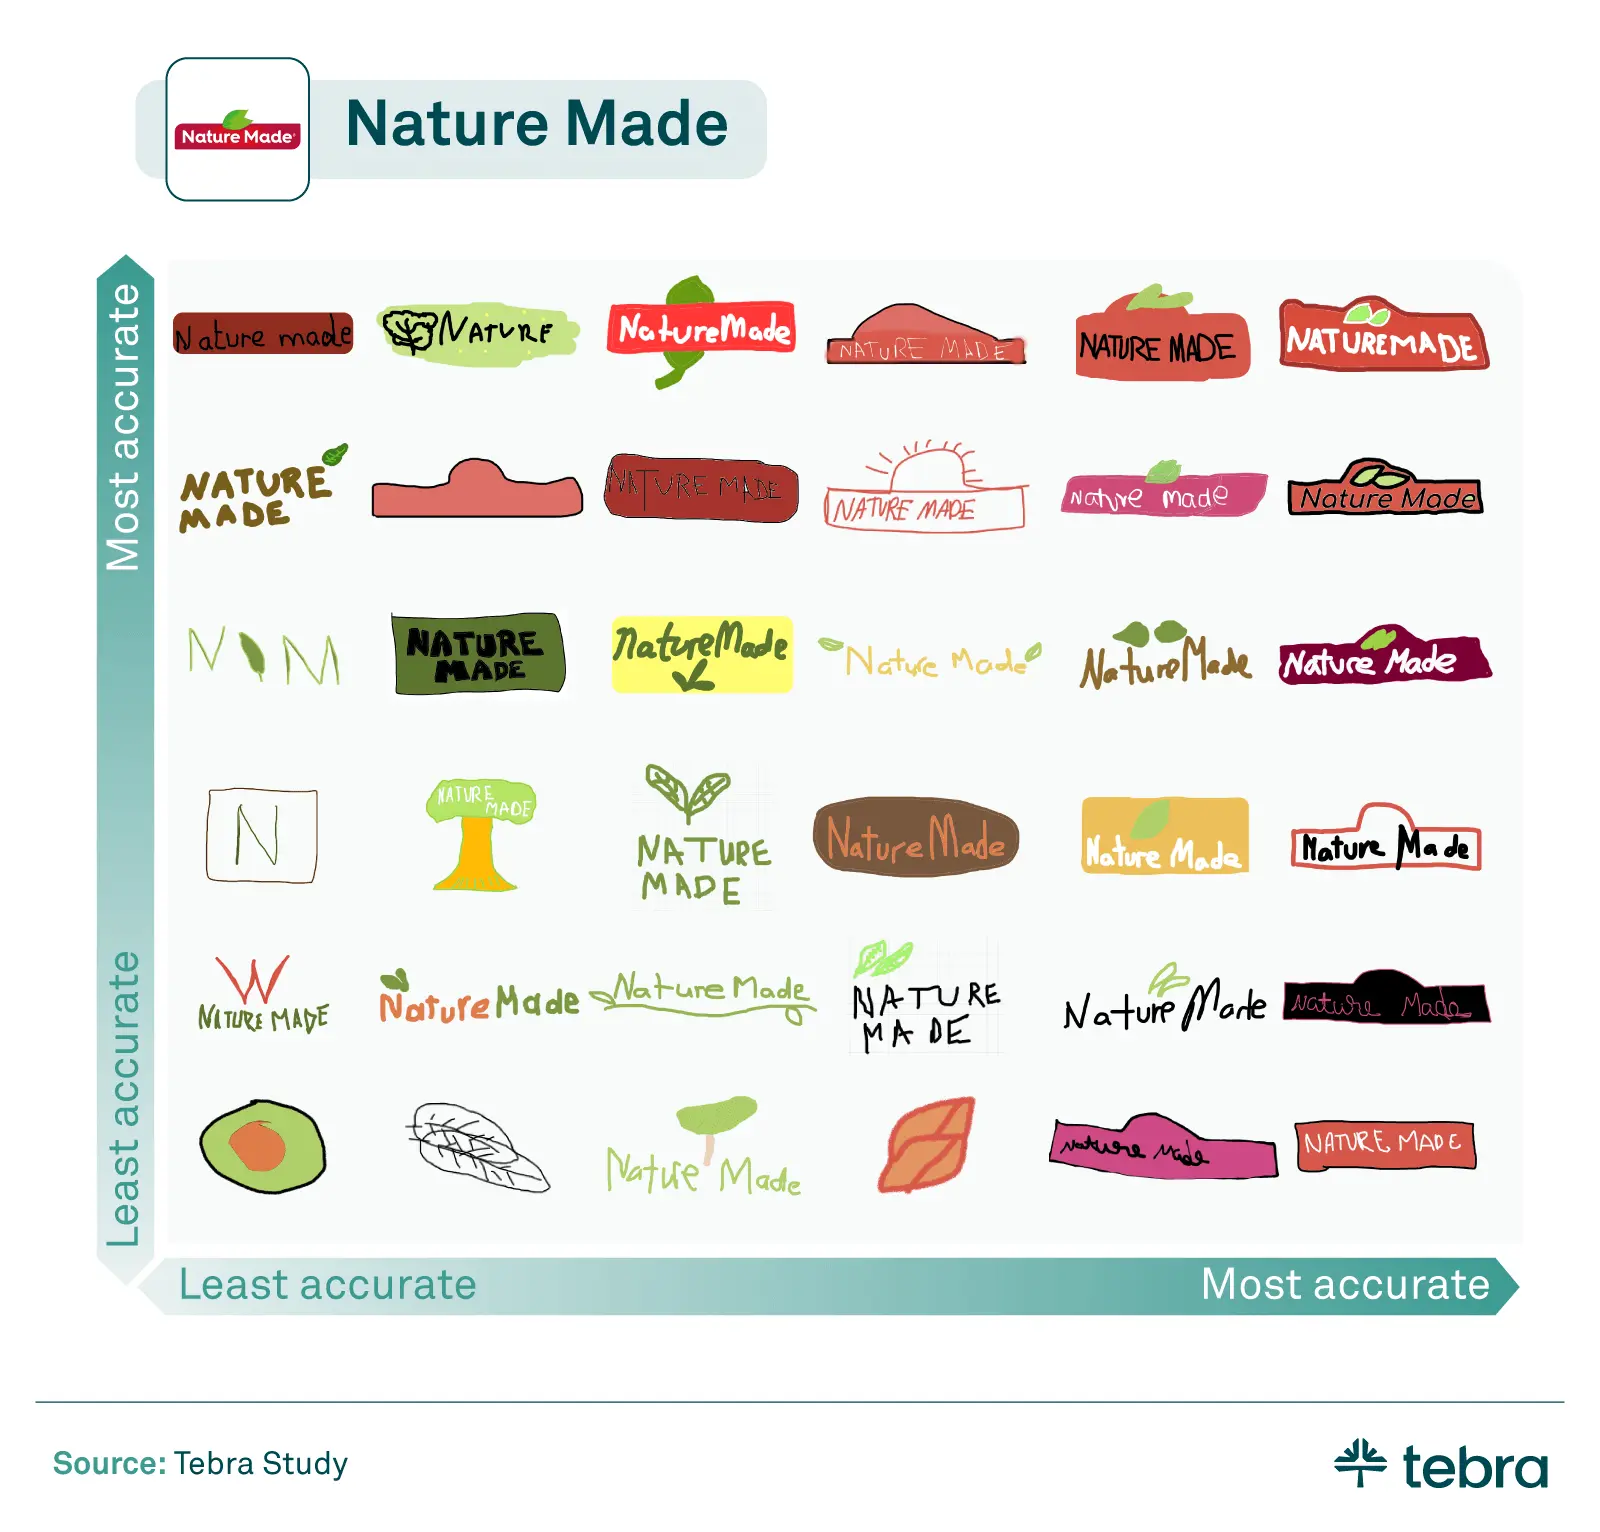 Nature Made logos by poll participants